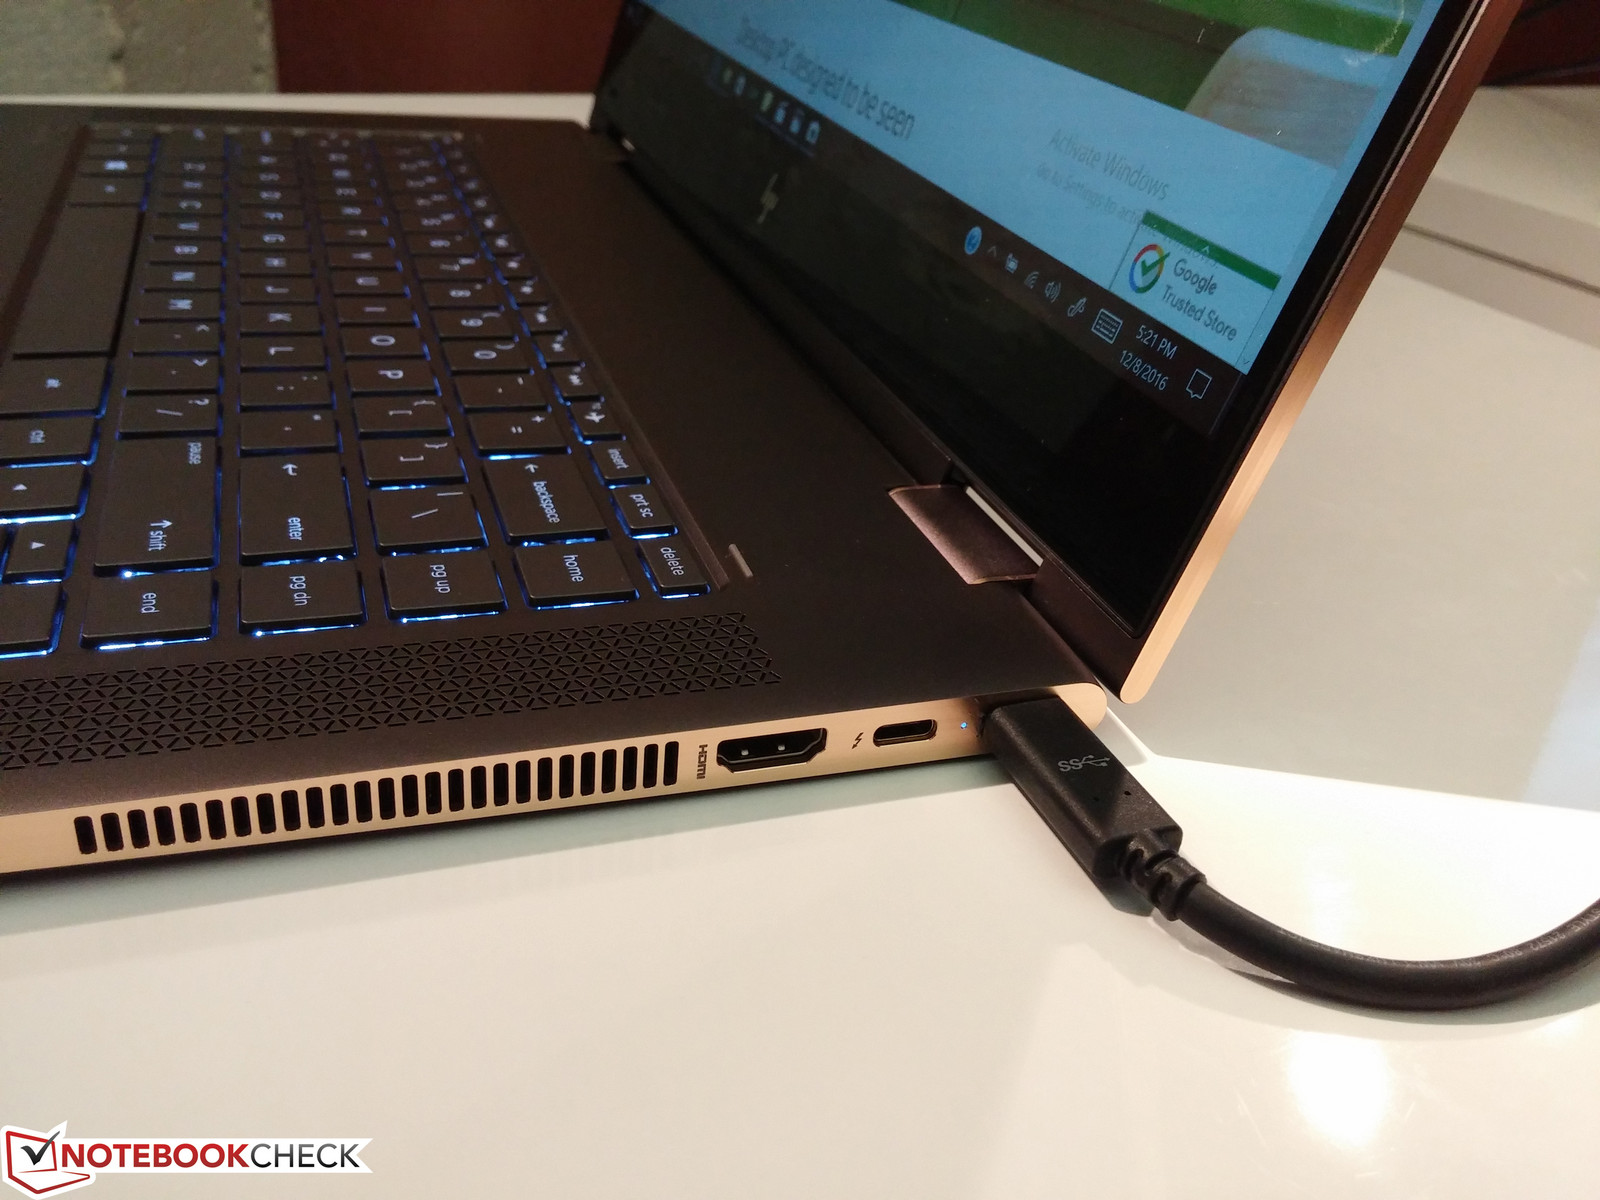 New 2017 HP Spectre x360 15 is now thicker and more powerful